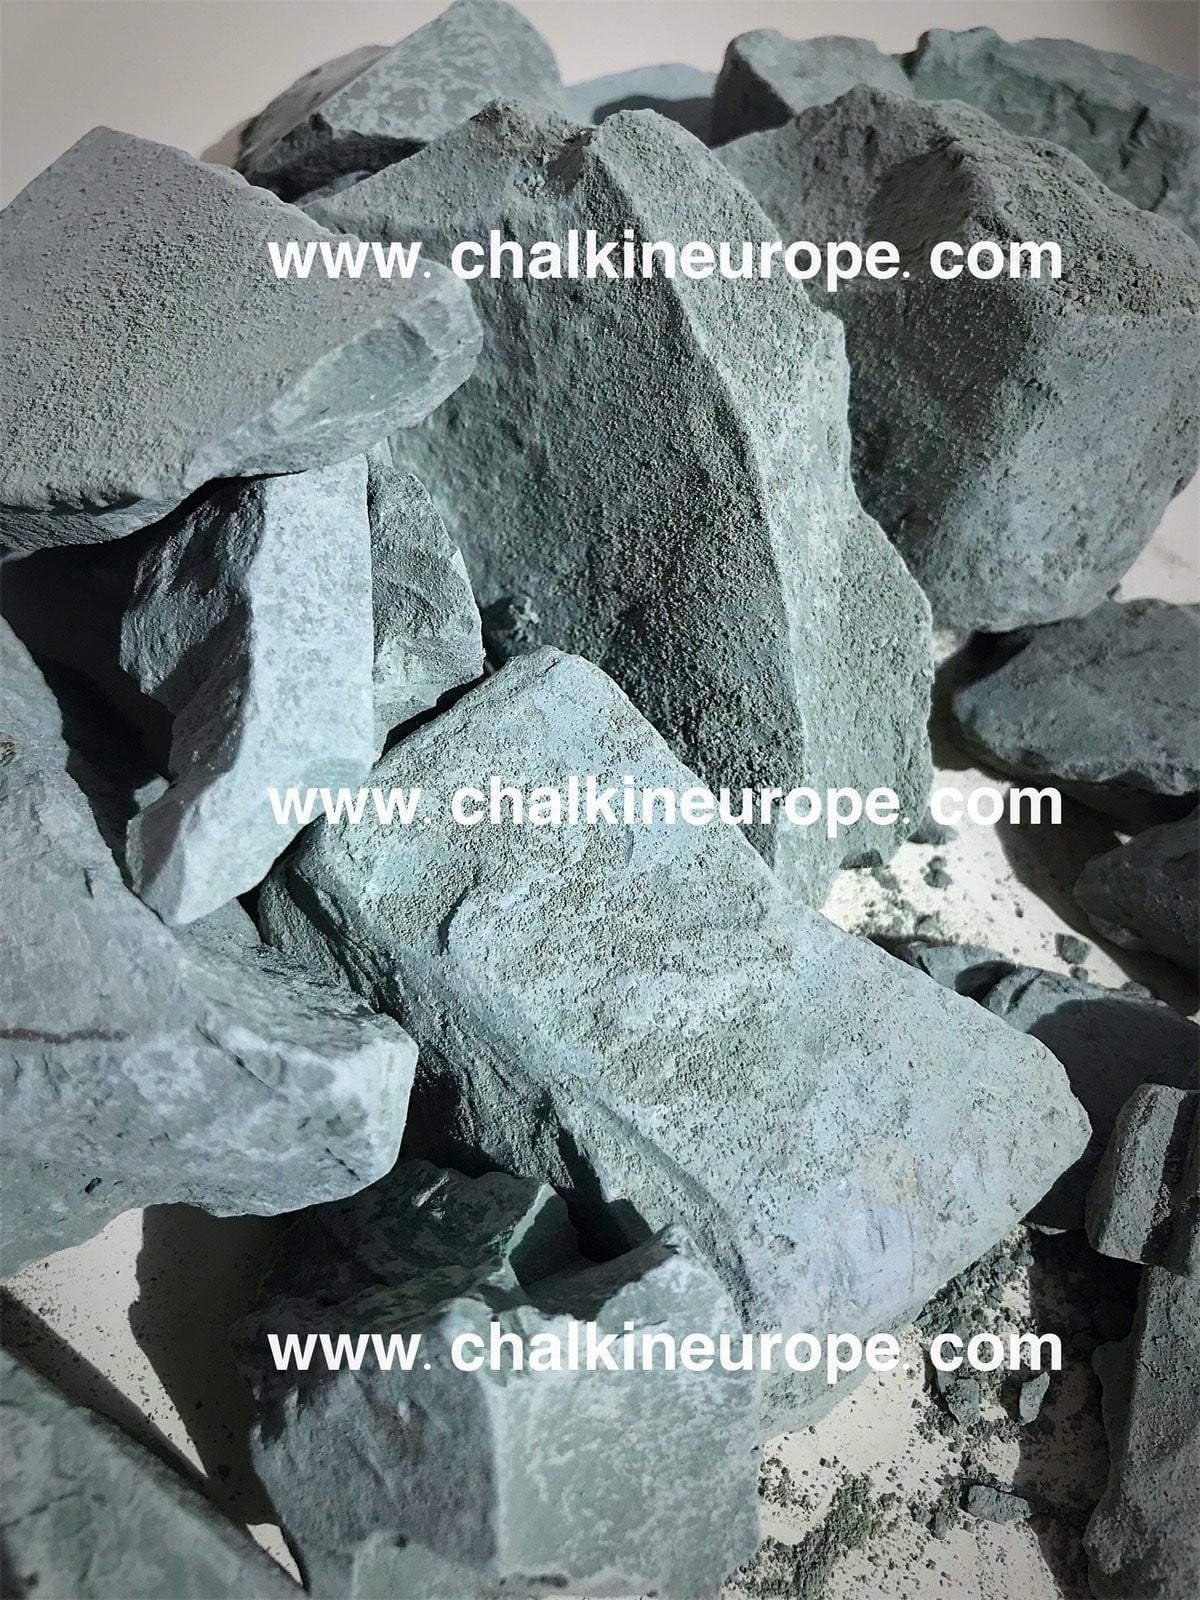 Cambrian Blue Clay - Chalkineurope